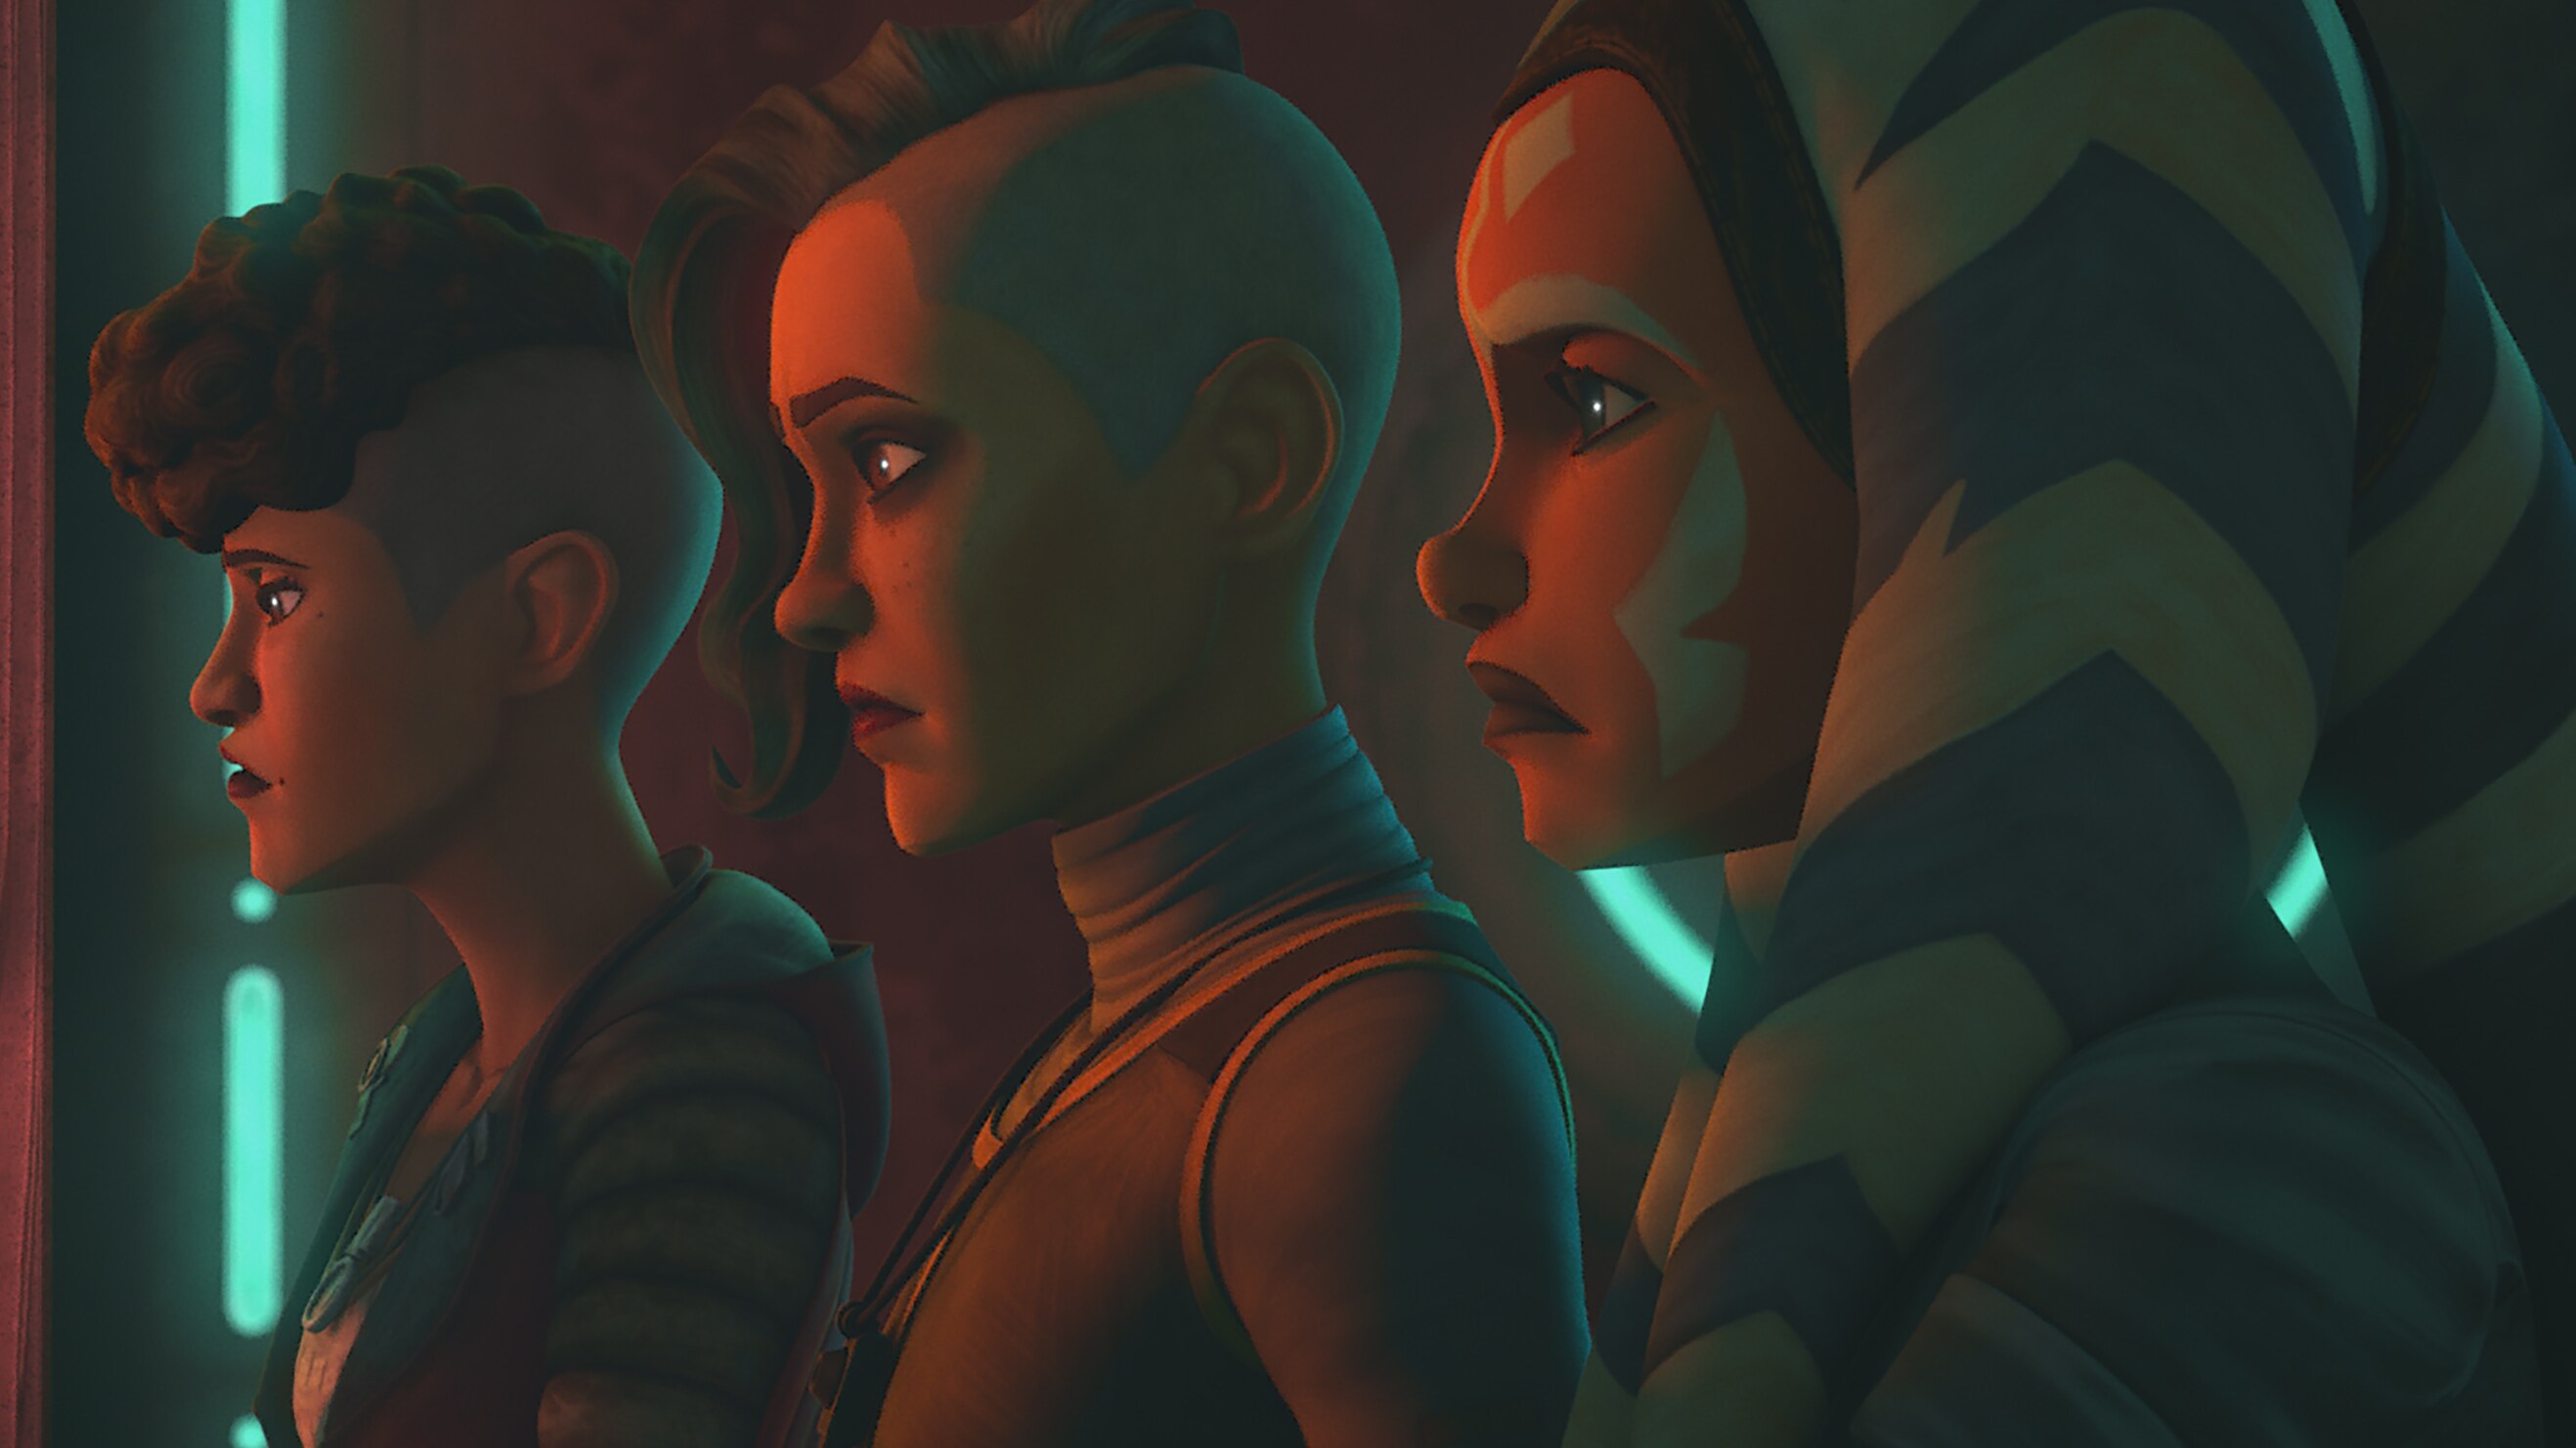 Trace, Rafa and Ahsoka are imprisoned by the Pykes in STAR WARS: THE CLONE WARS, exclusively on Disney+.